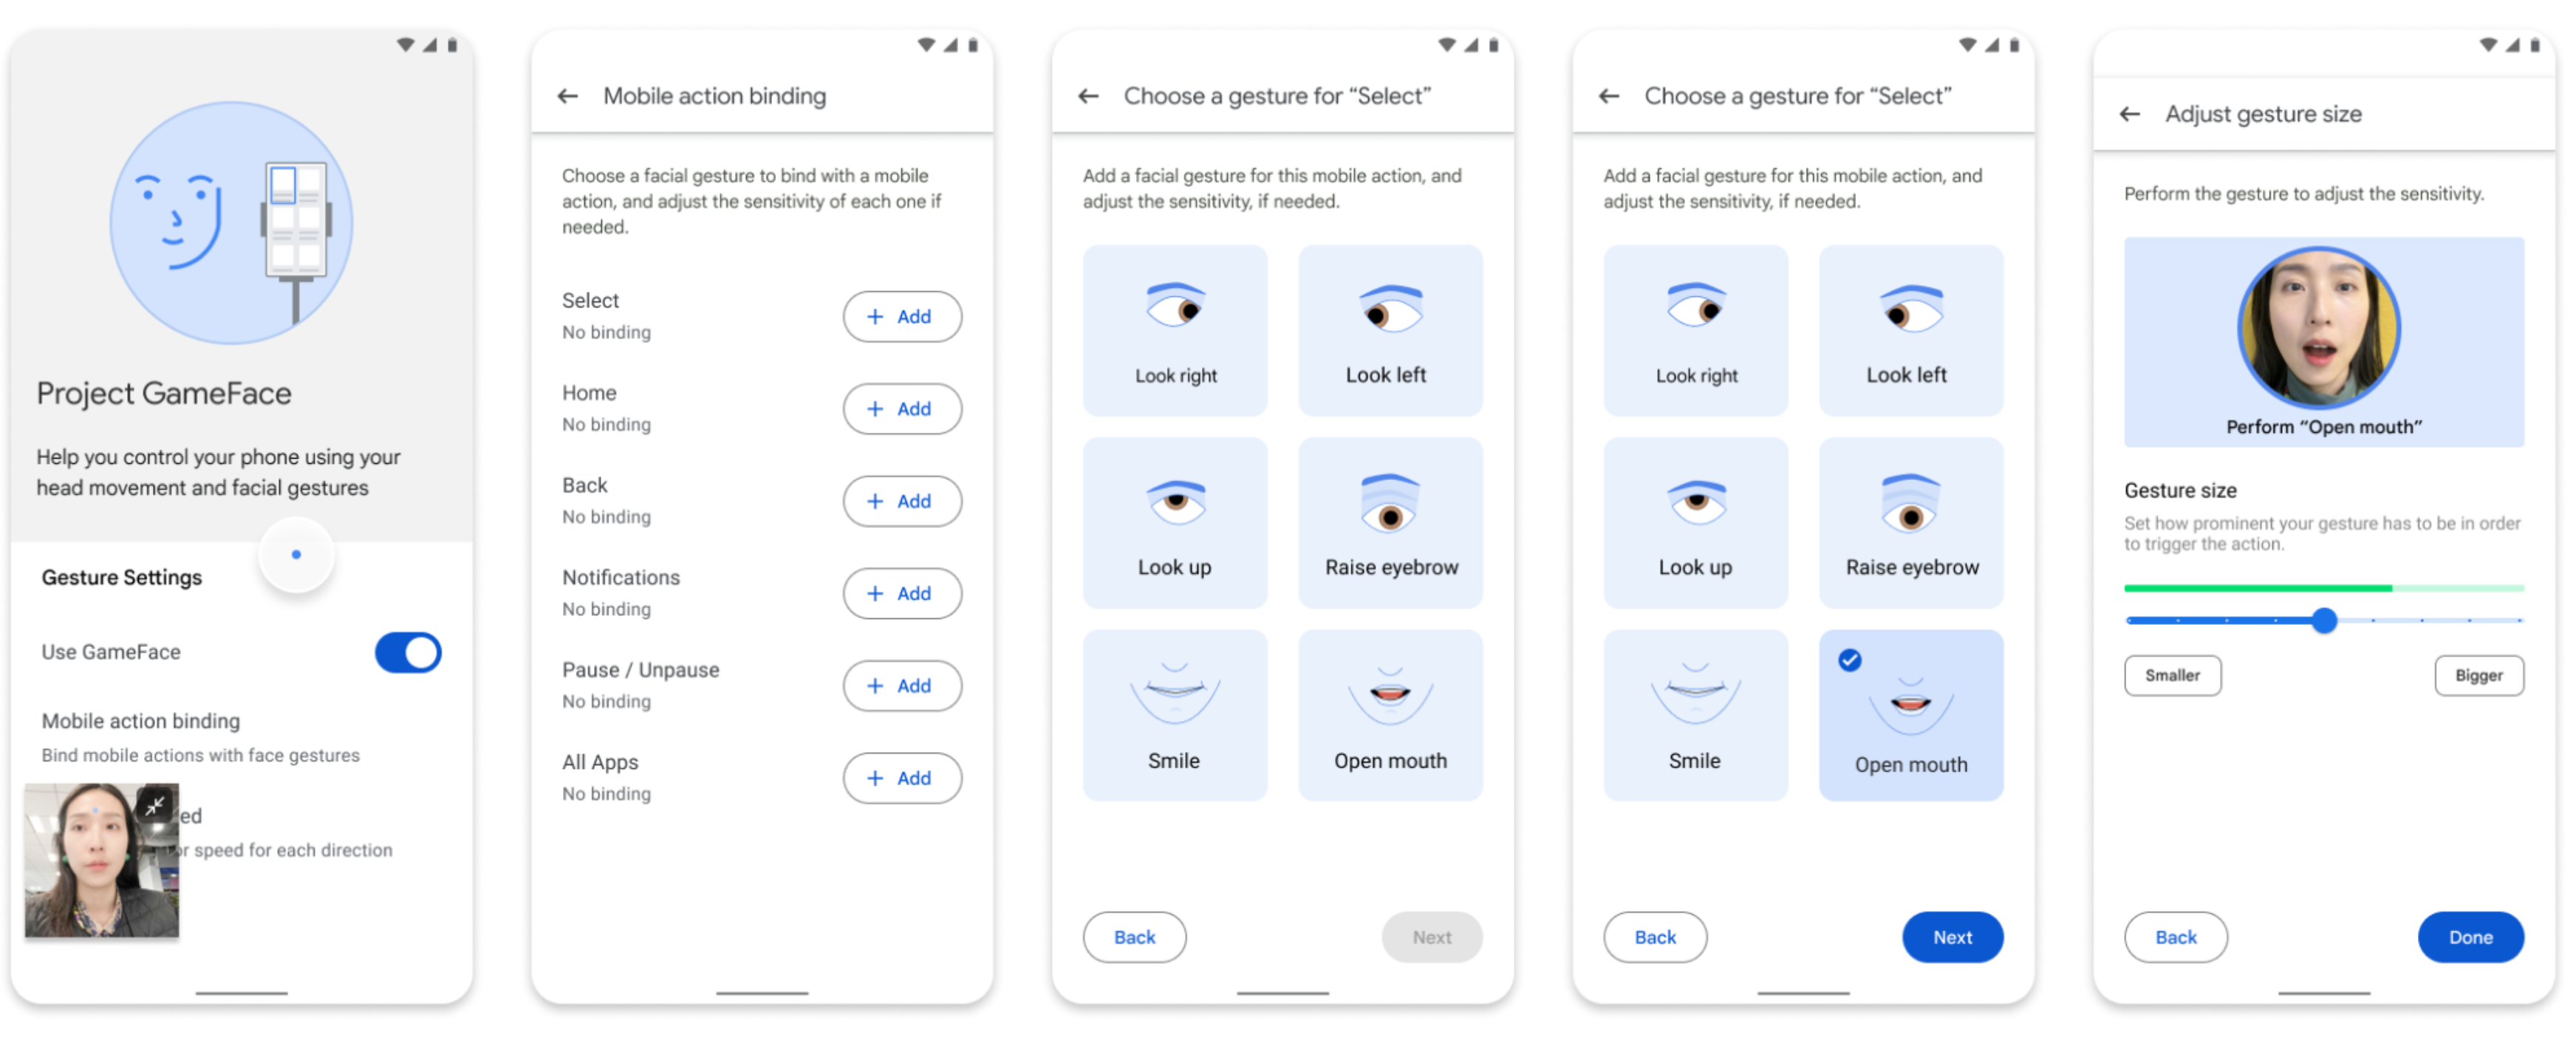 Image Credit–Google - Google’s Project Gameface goes mobile, bringing hands-free control to Android